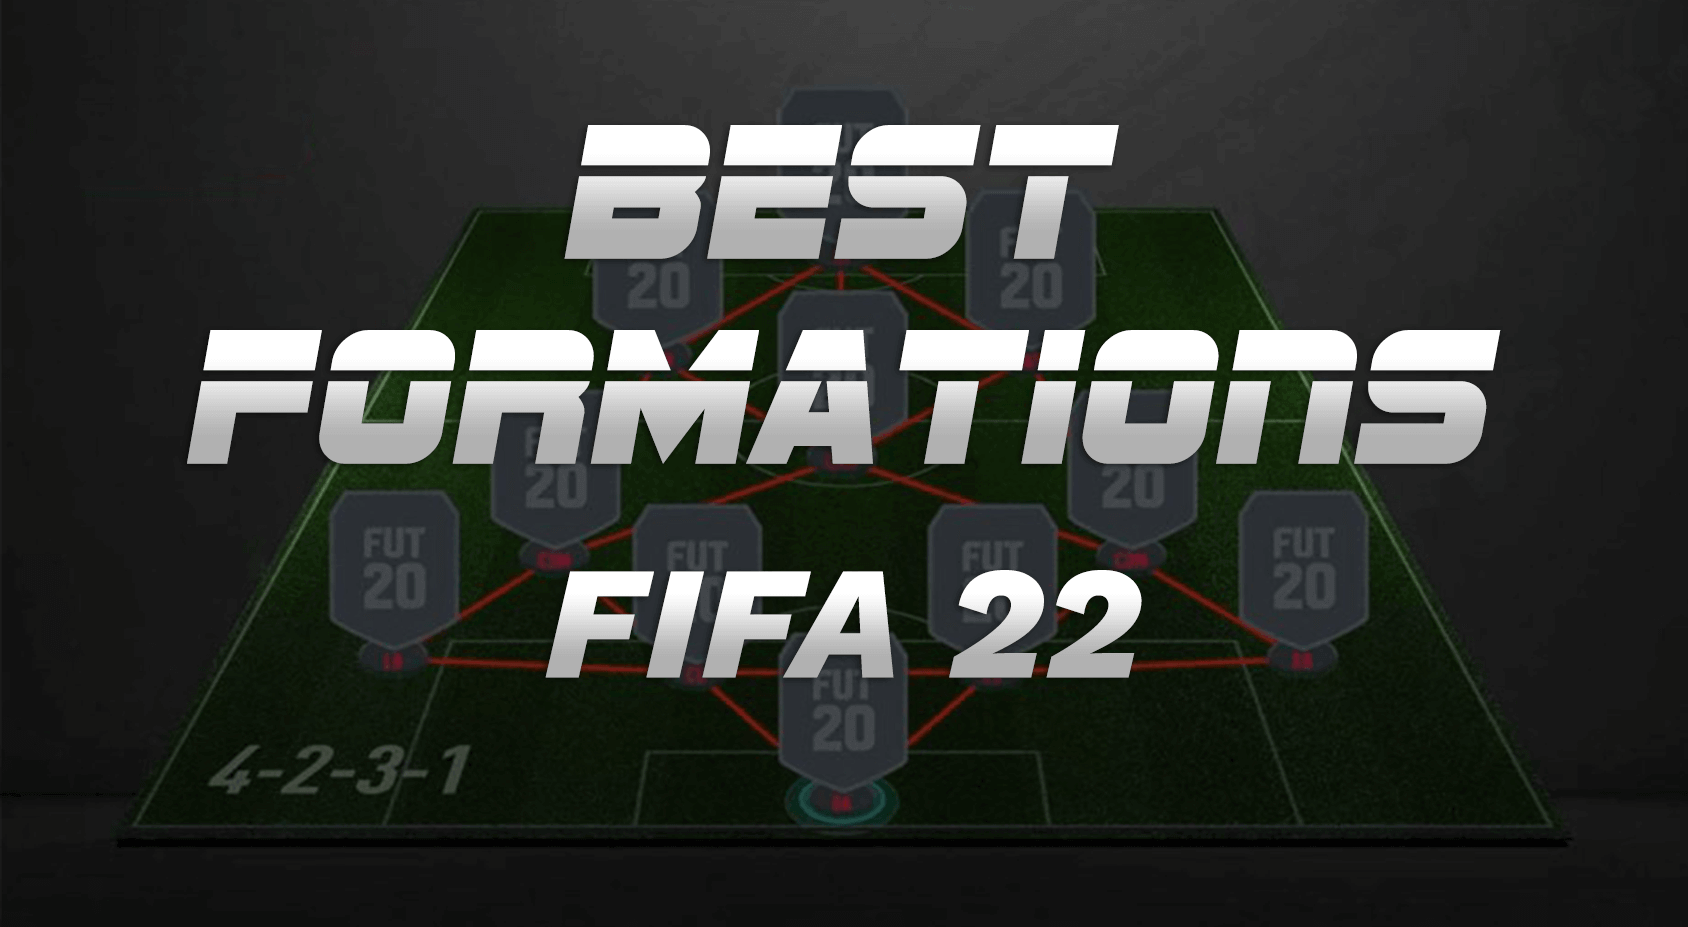 Best-FIFA22-Formations.png